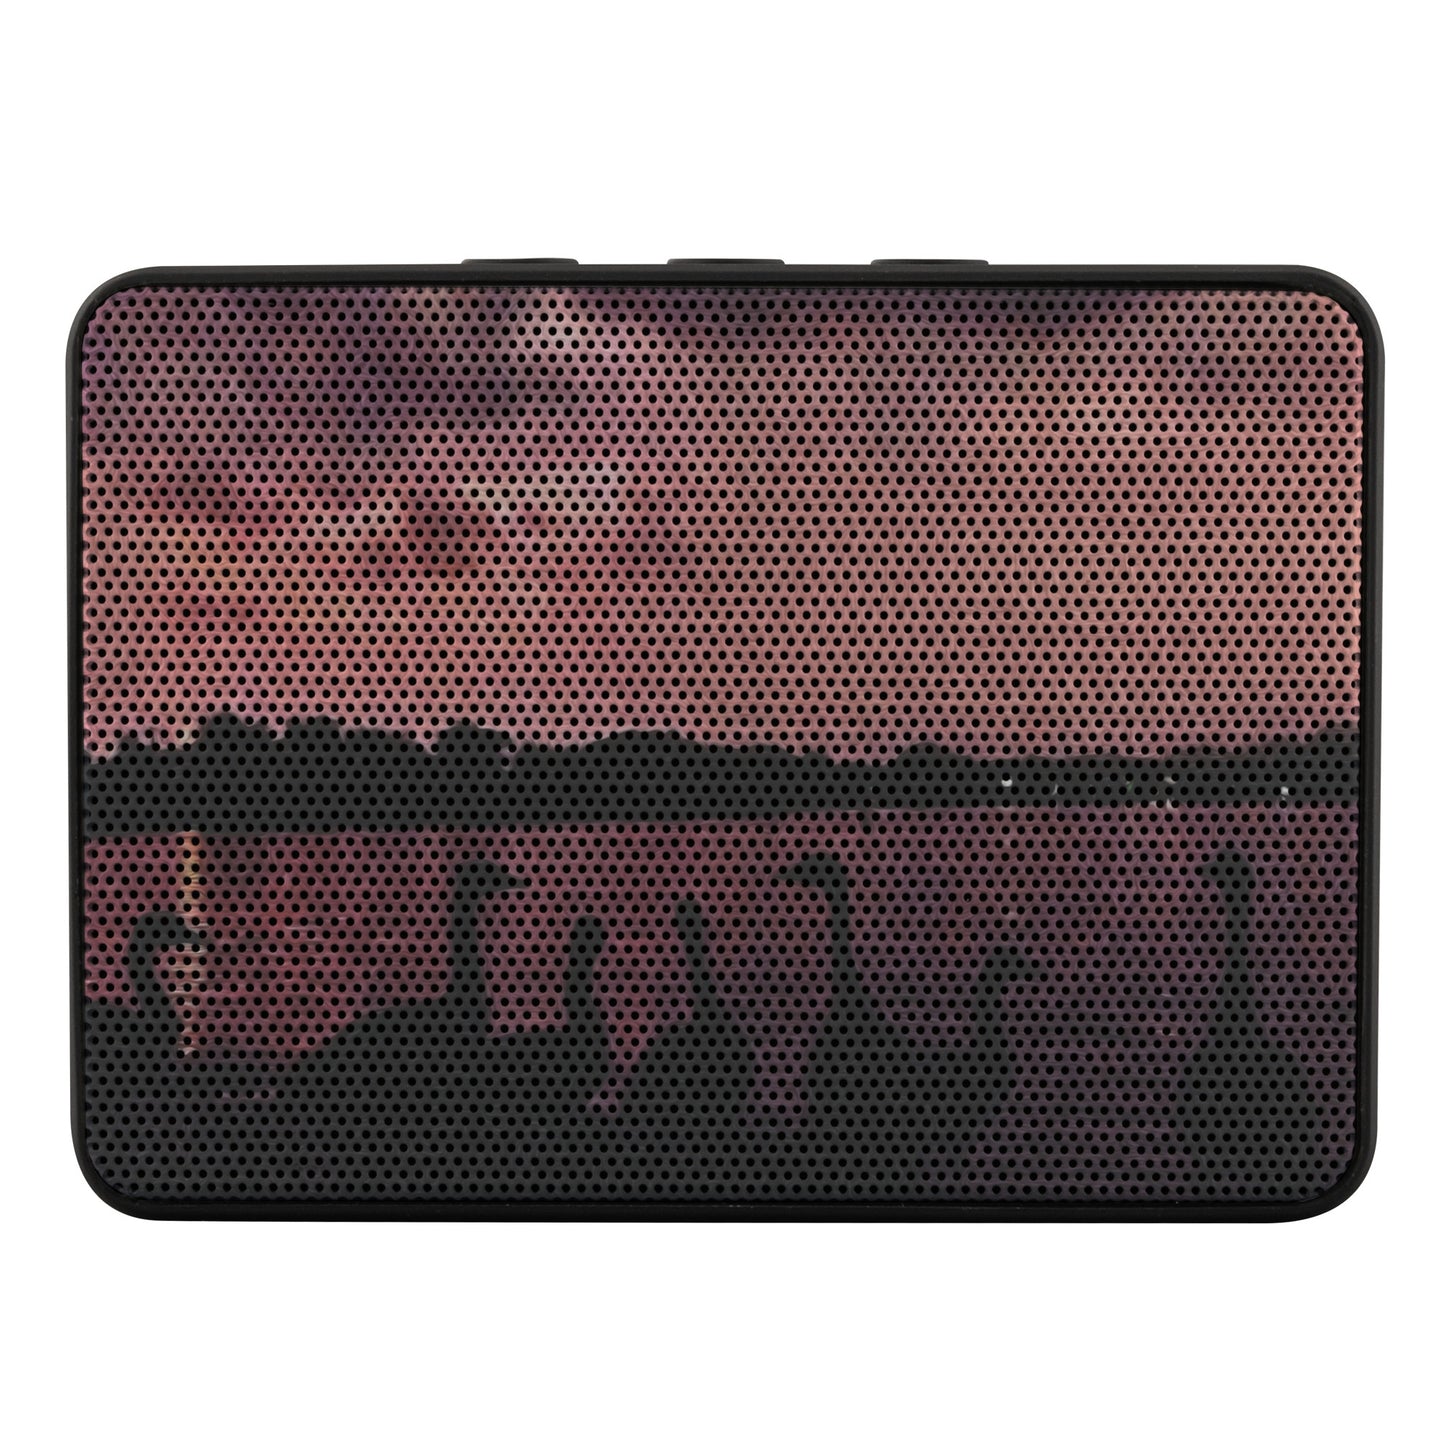 Geese at Sunset Boxanne Bluetooth Speakers